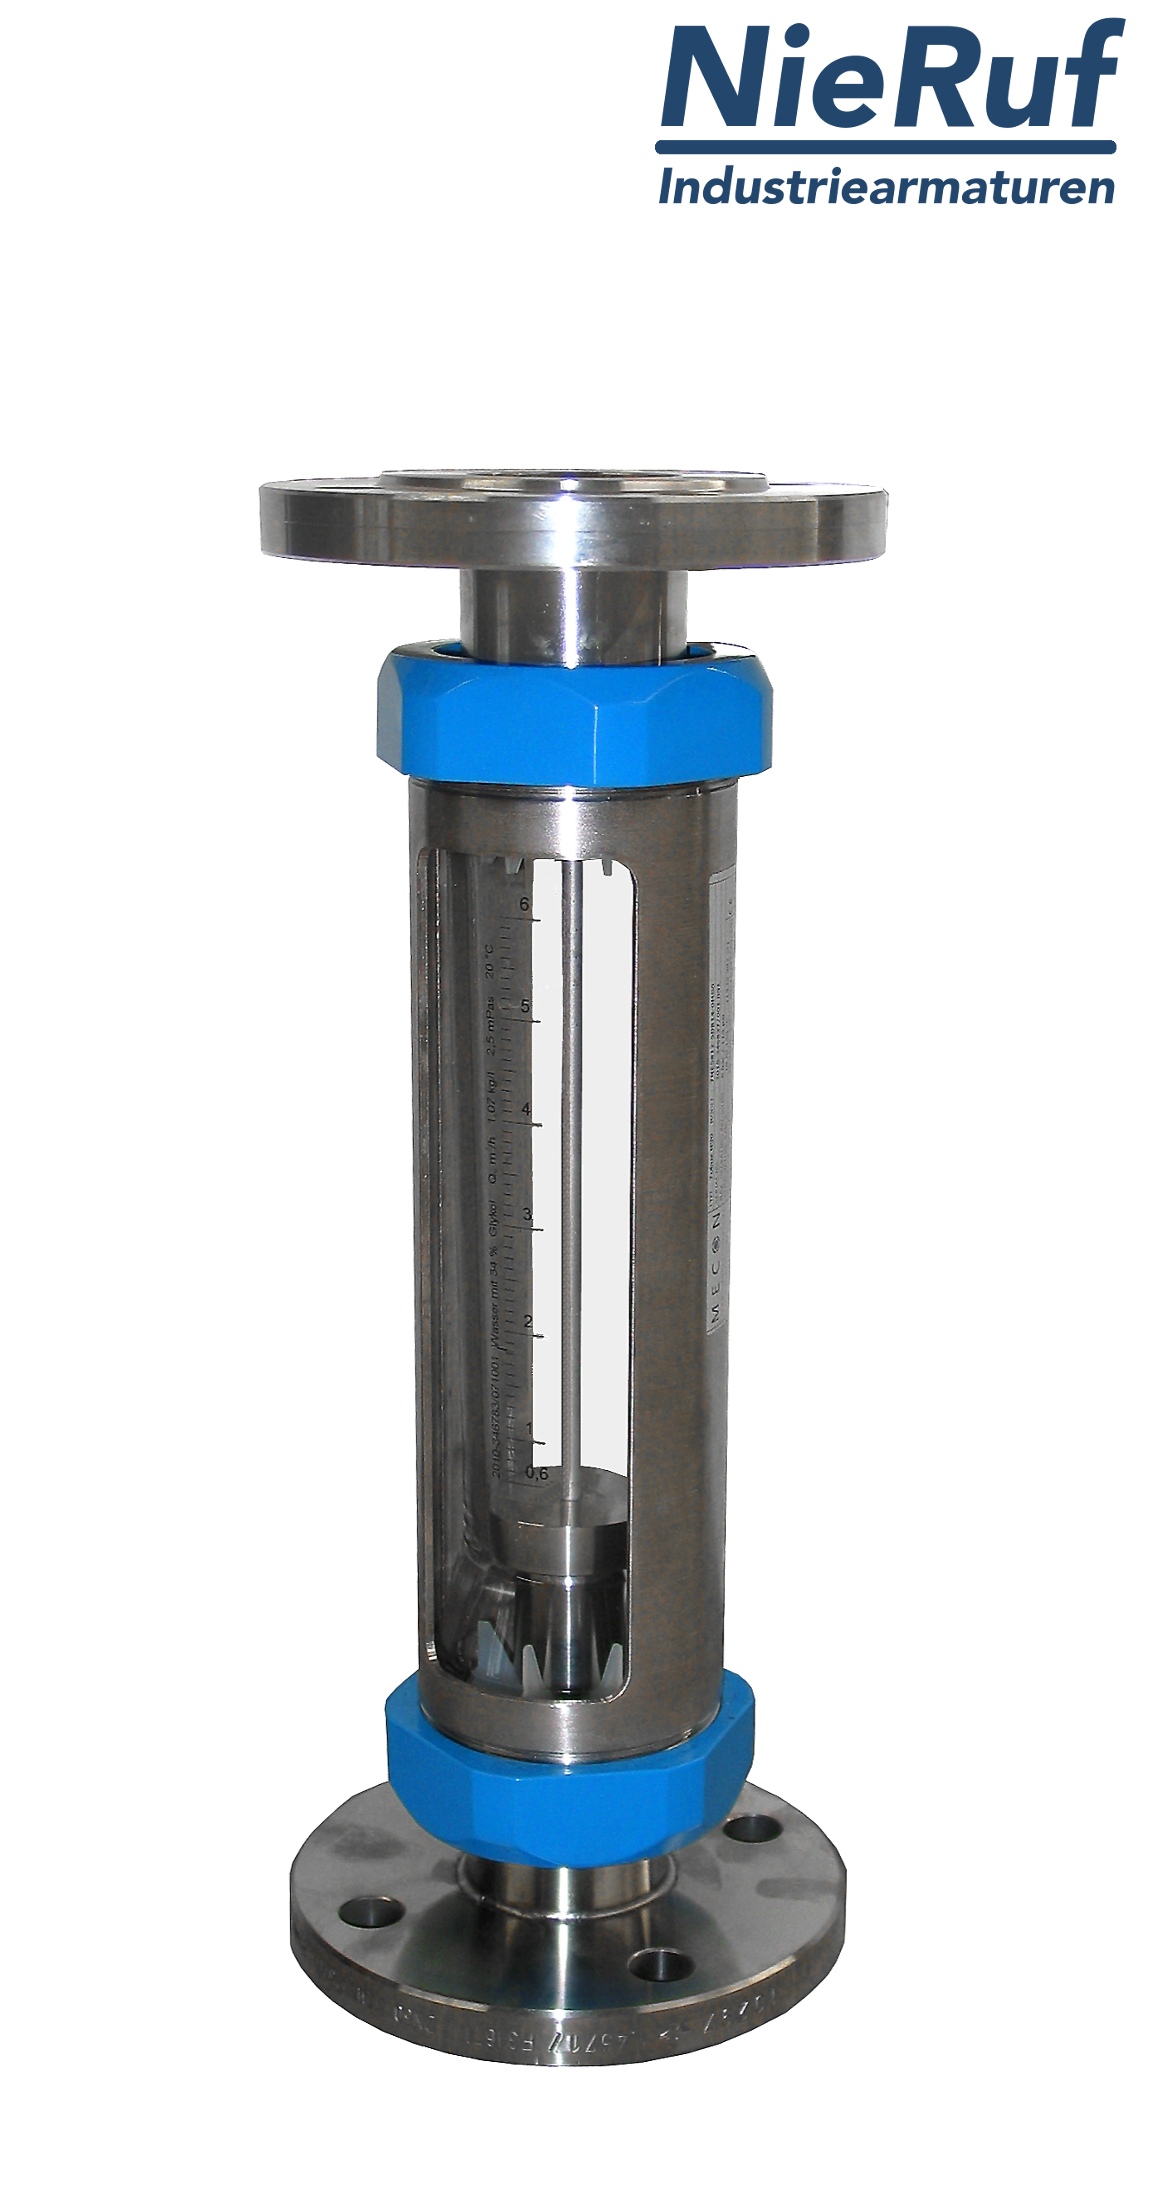 Variable area flowmeter stainless steel + borosilicate flange DN15 4.0 - 40.0 l/h water FKM